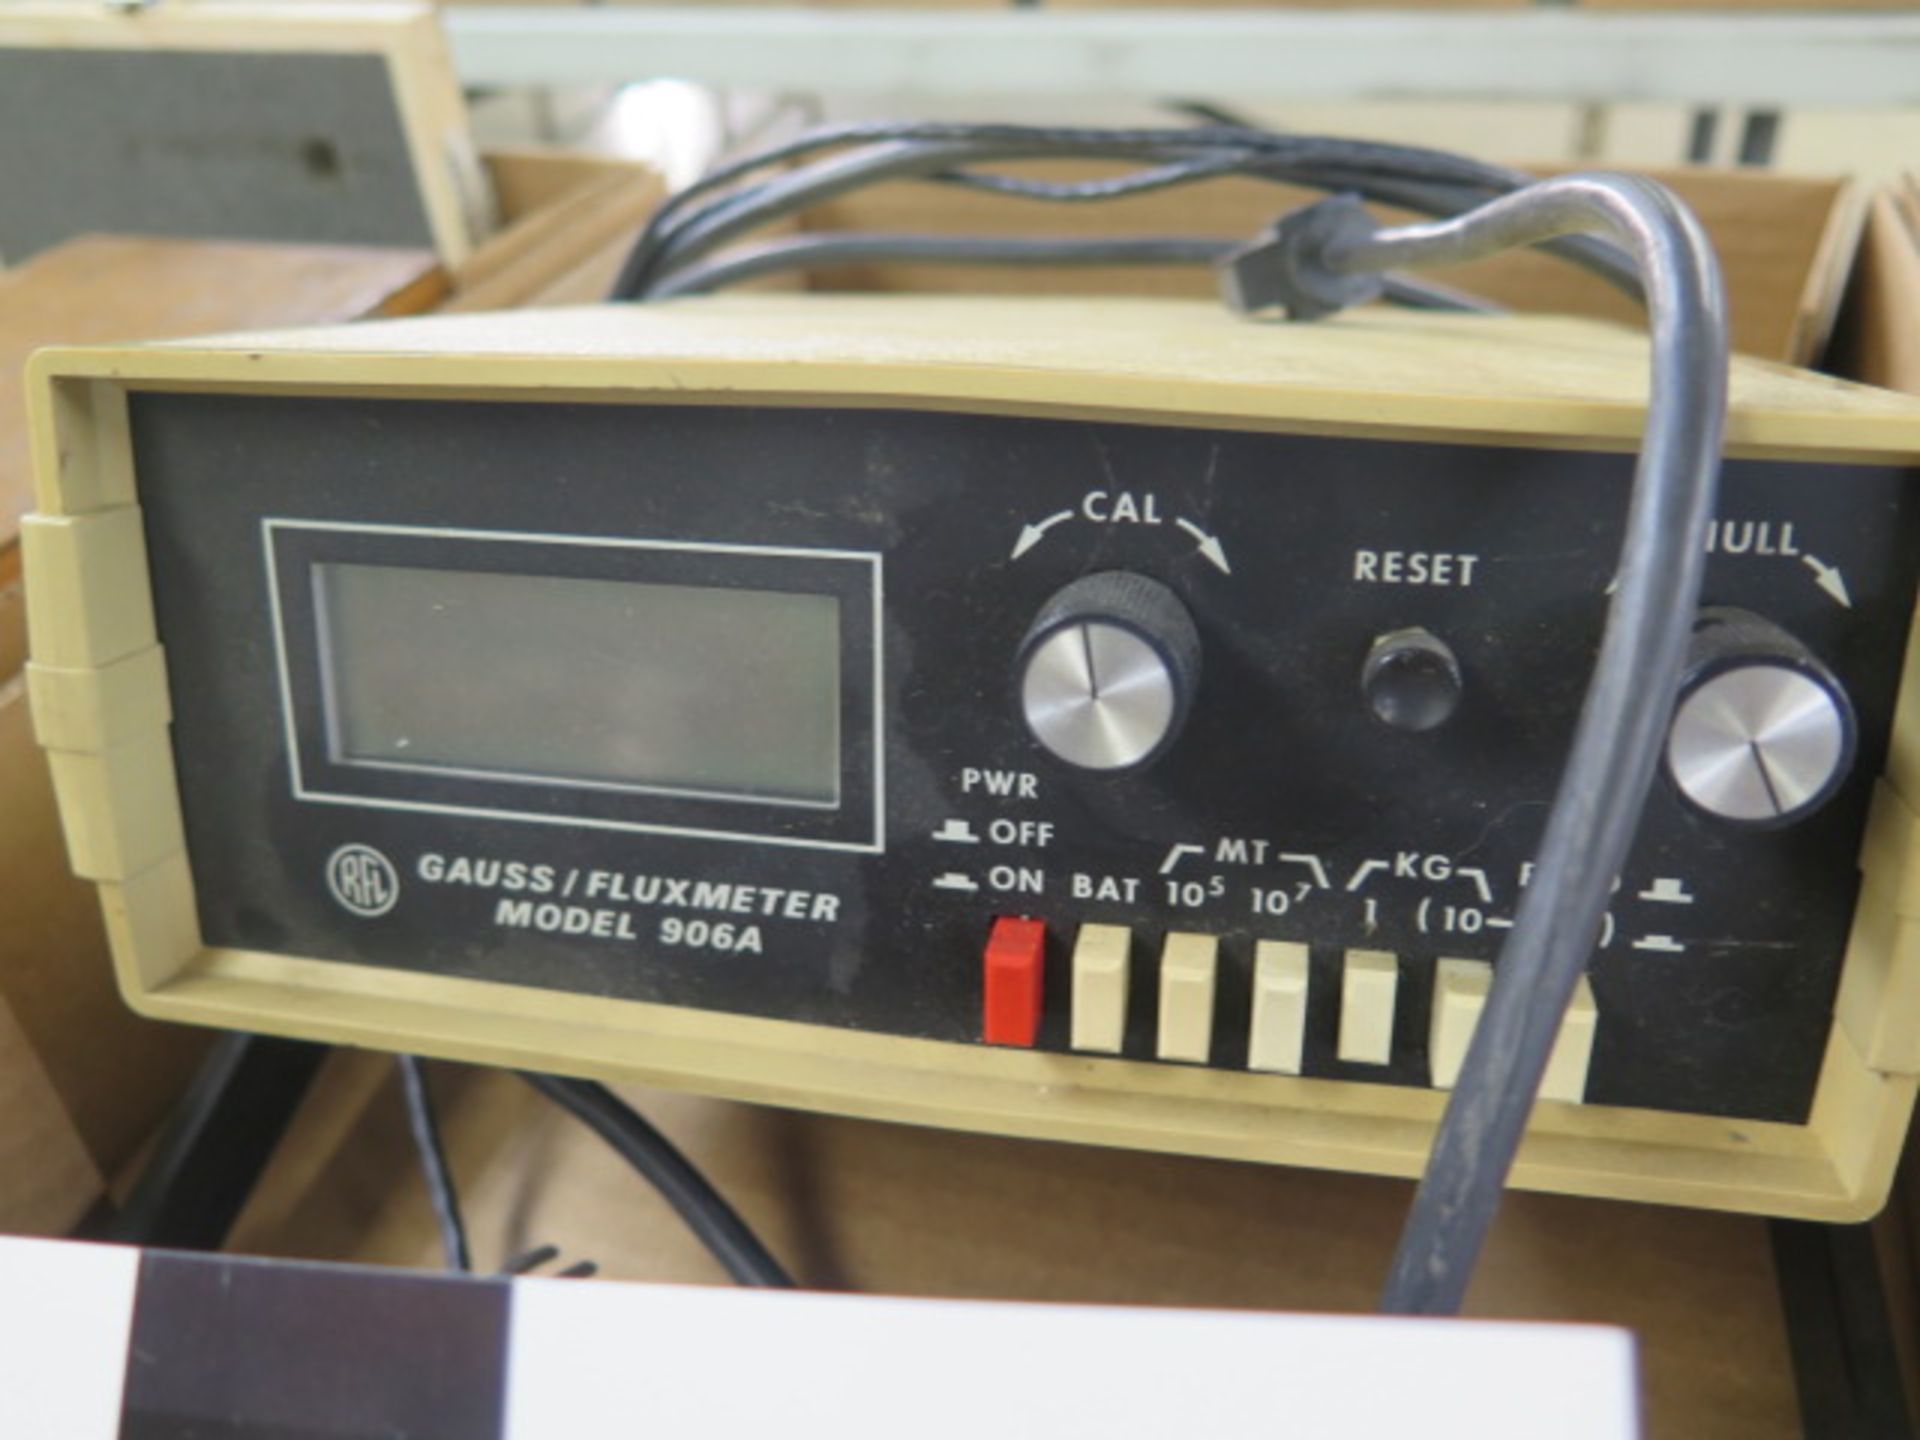 RFL mdl. 906A Gauss / Fluxmeter (SOLD AS-IS - NO WARRANTY) - Image 3 of 4